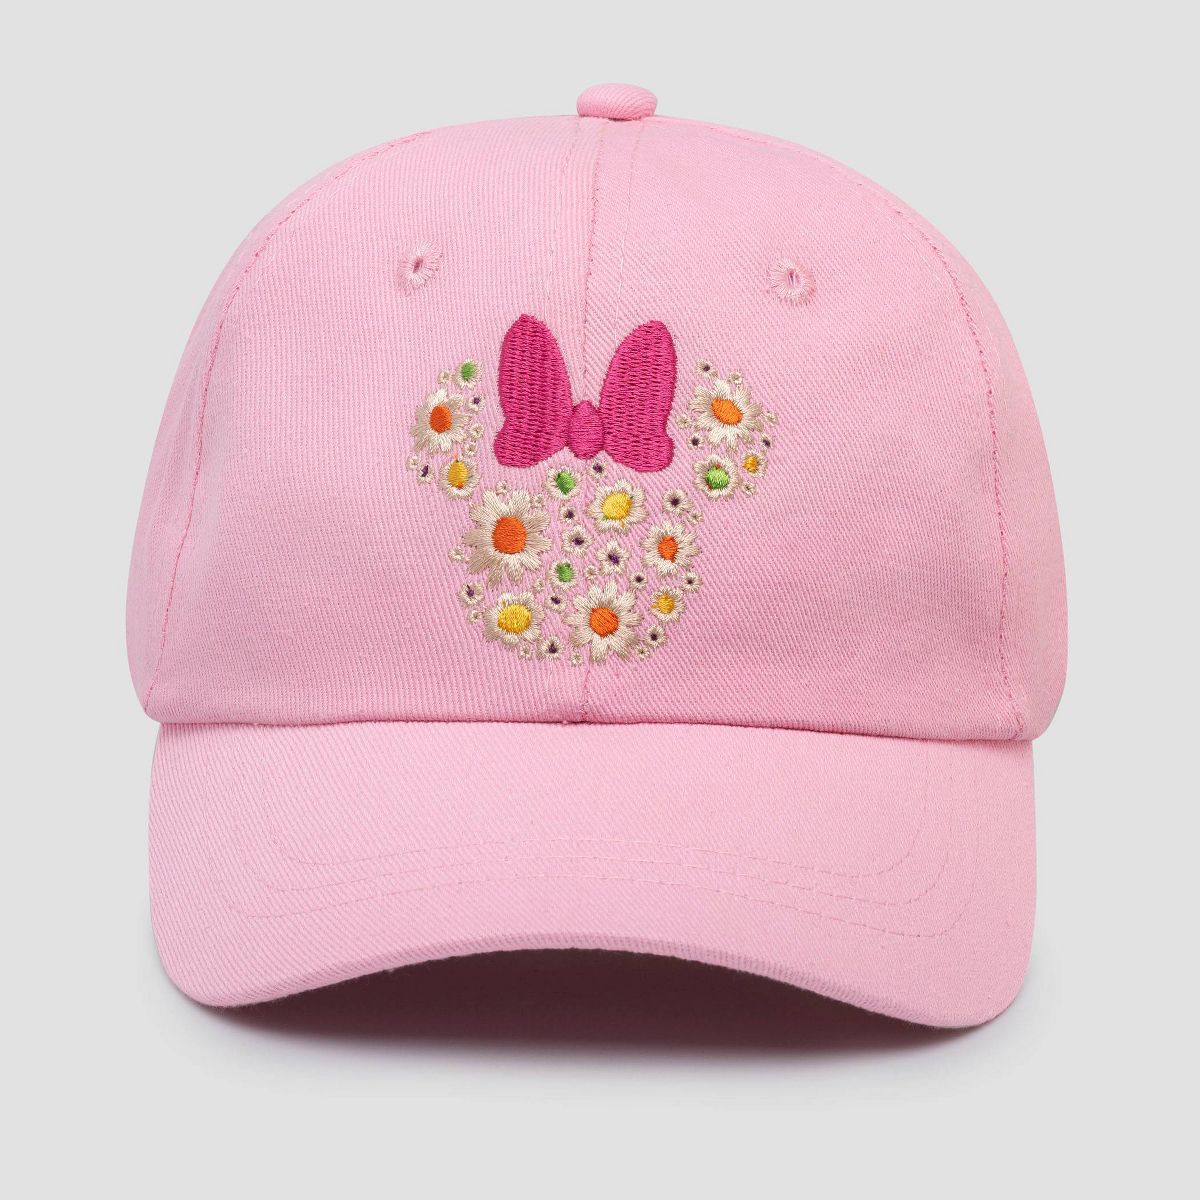 Toddler Boys' Minnie Mouse Baseball Hat - Pink | Target